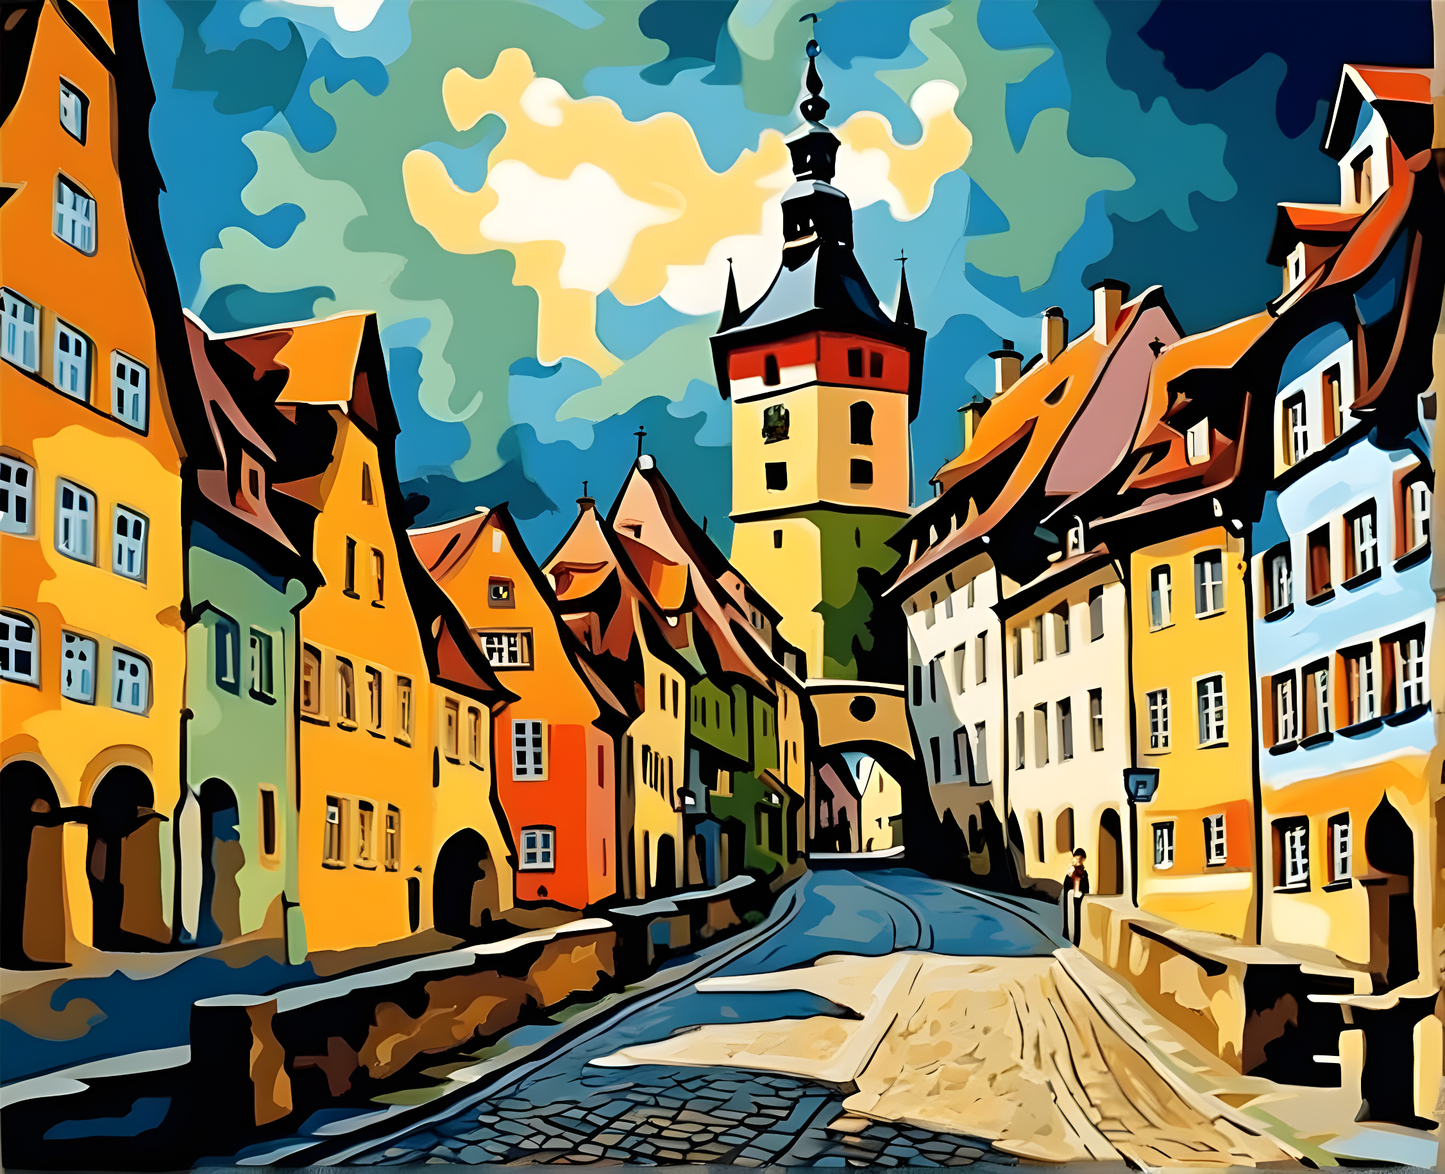 City of Rothenburg, Germany - Van-Go Paint-By-Number Kit